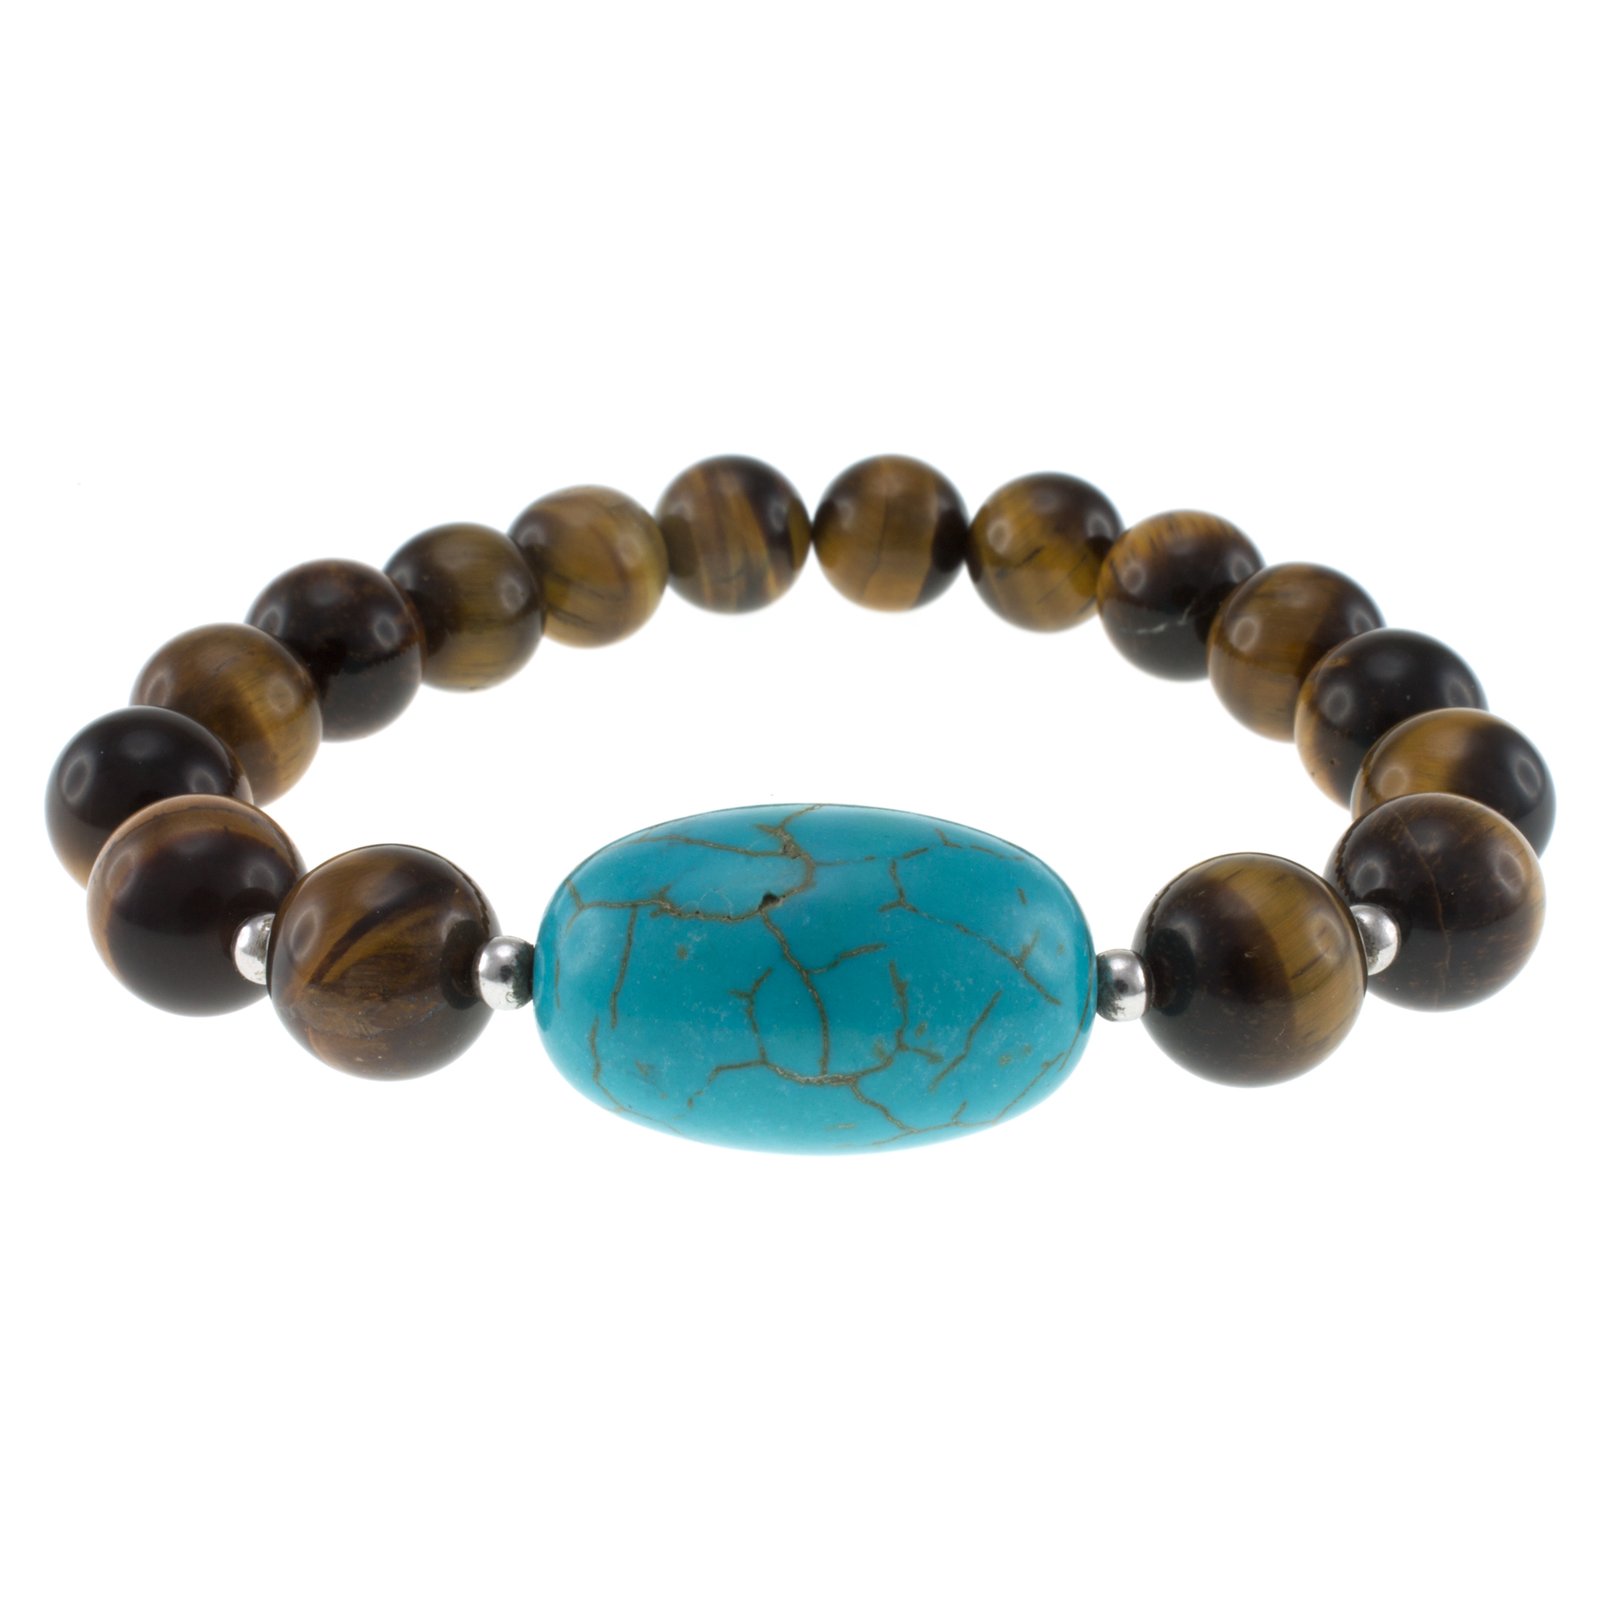 Pearlz Ocean Tigers Eye and Turquoise Howlite Stretch Bracelet